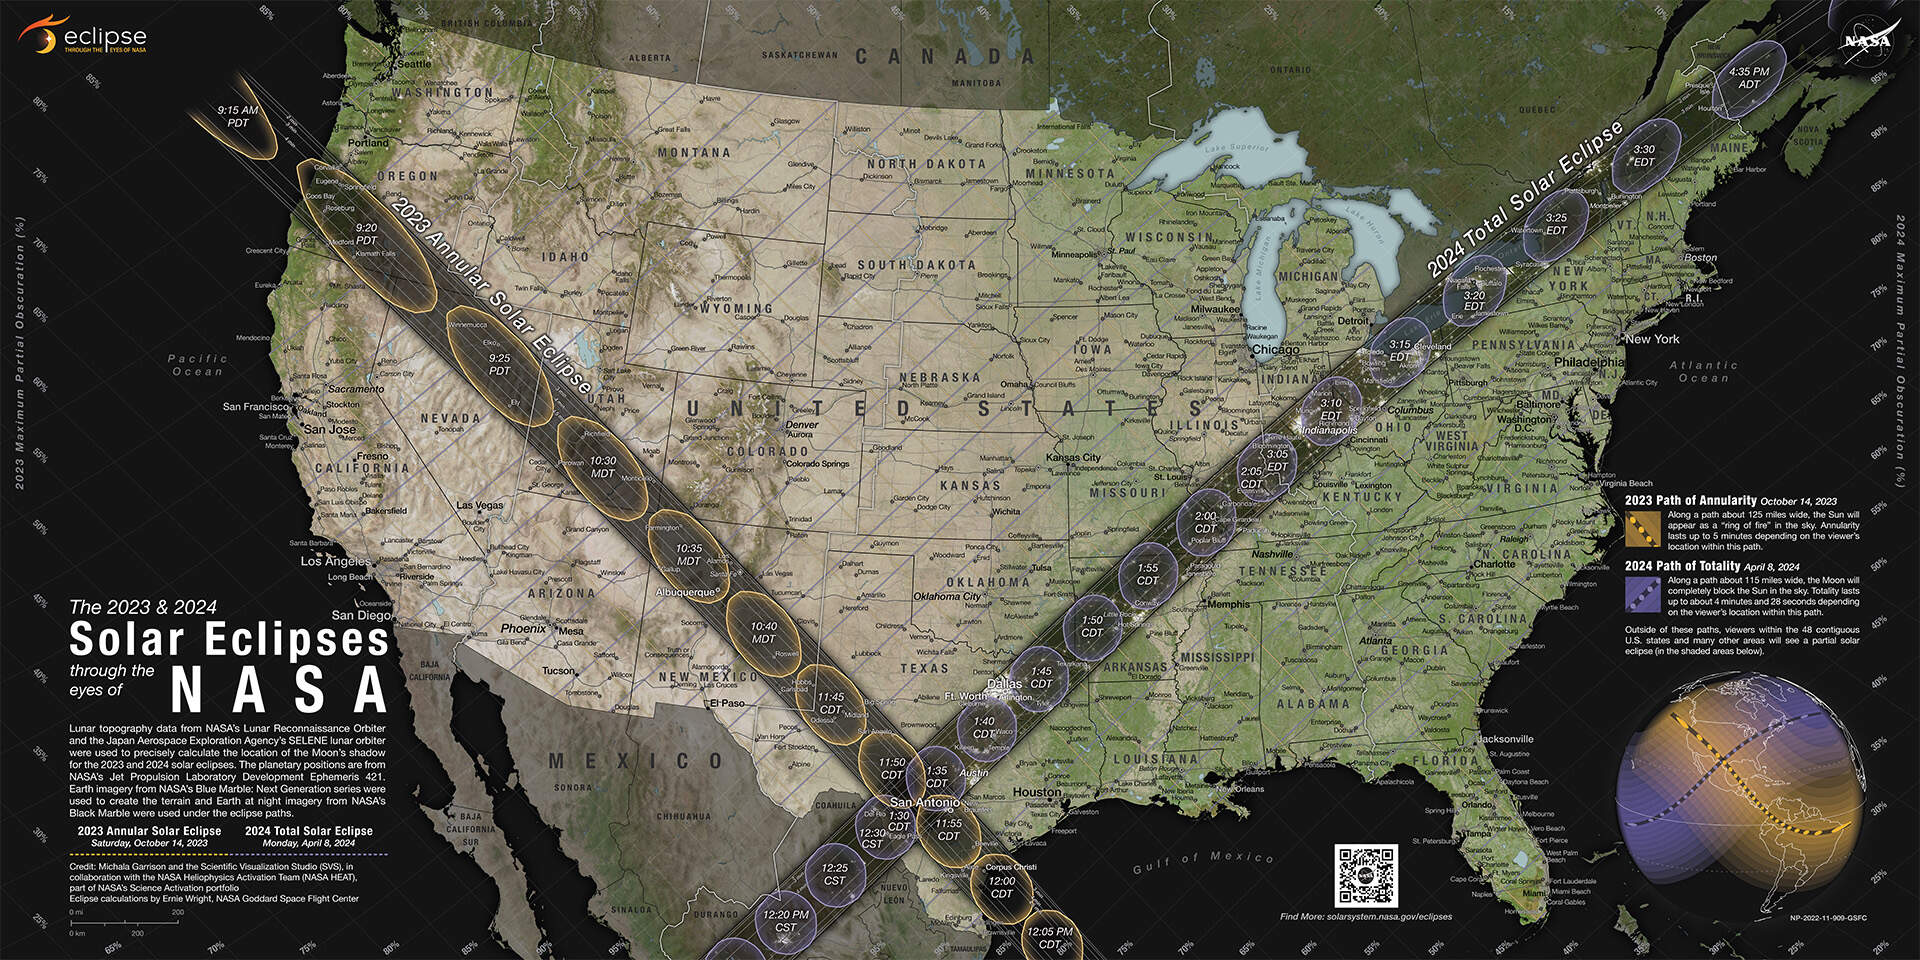 "The 2023 & 2024 Solar eclipses through the eyes of NASA" map charts the pathways of two eclipses across the United States. (Image via NASA)